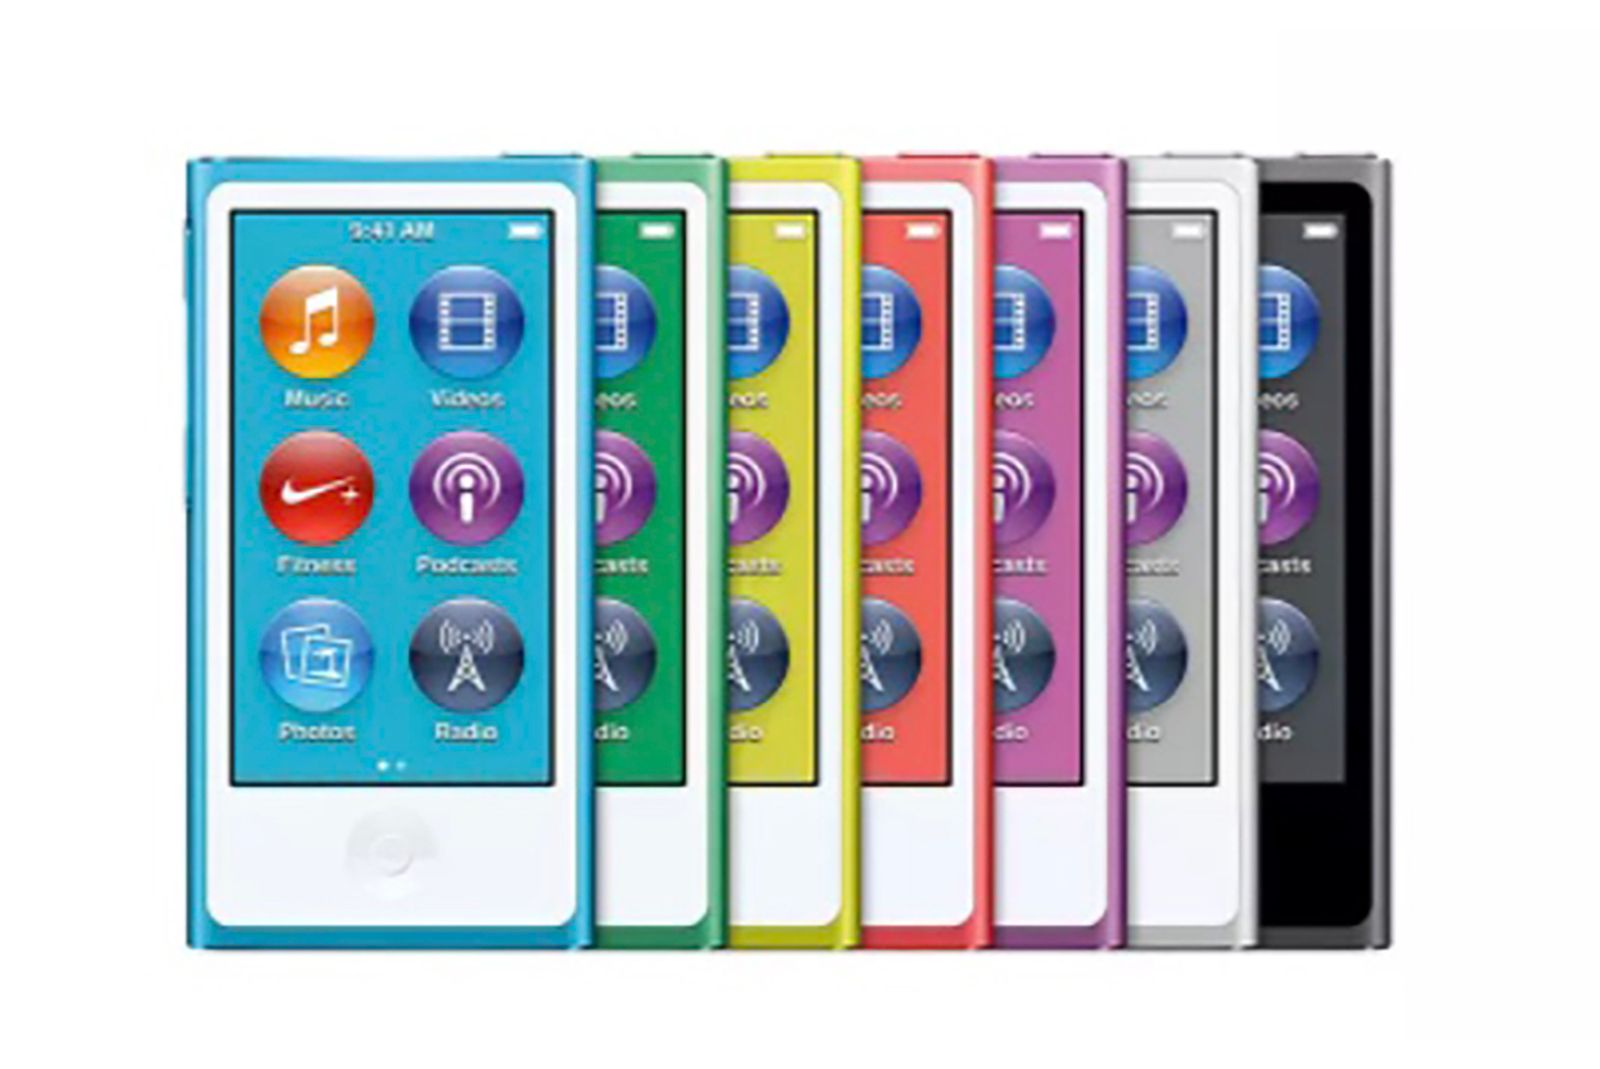 Every Apple iPod Model over the years (2001 to 2022) photo 17